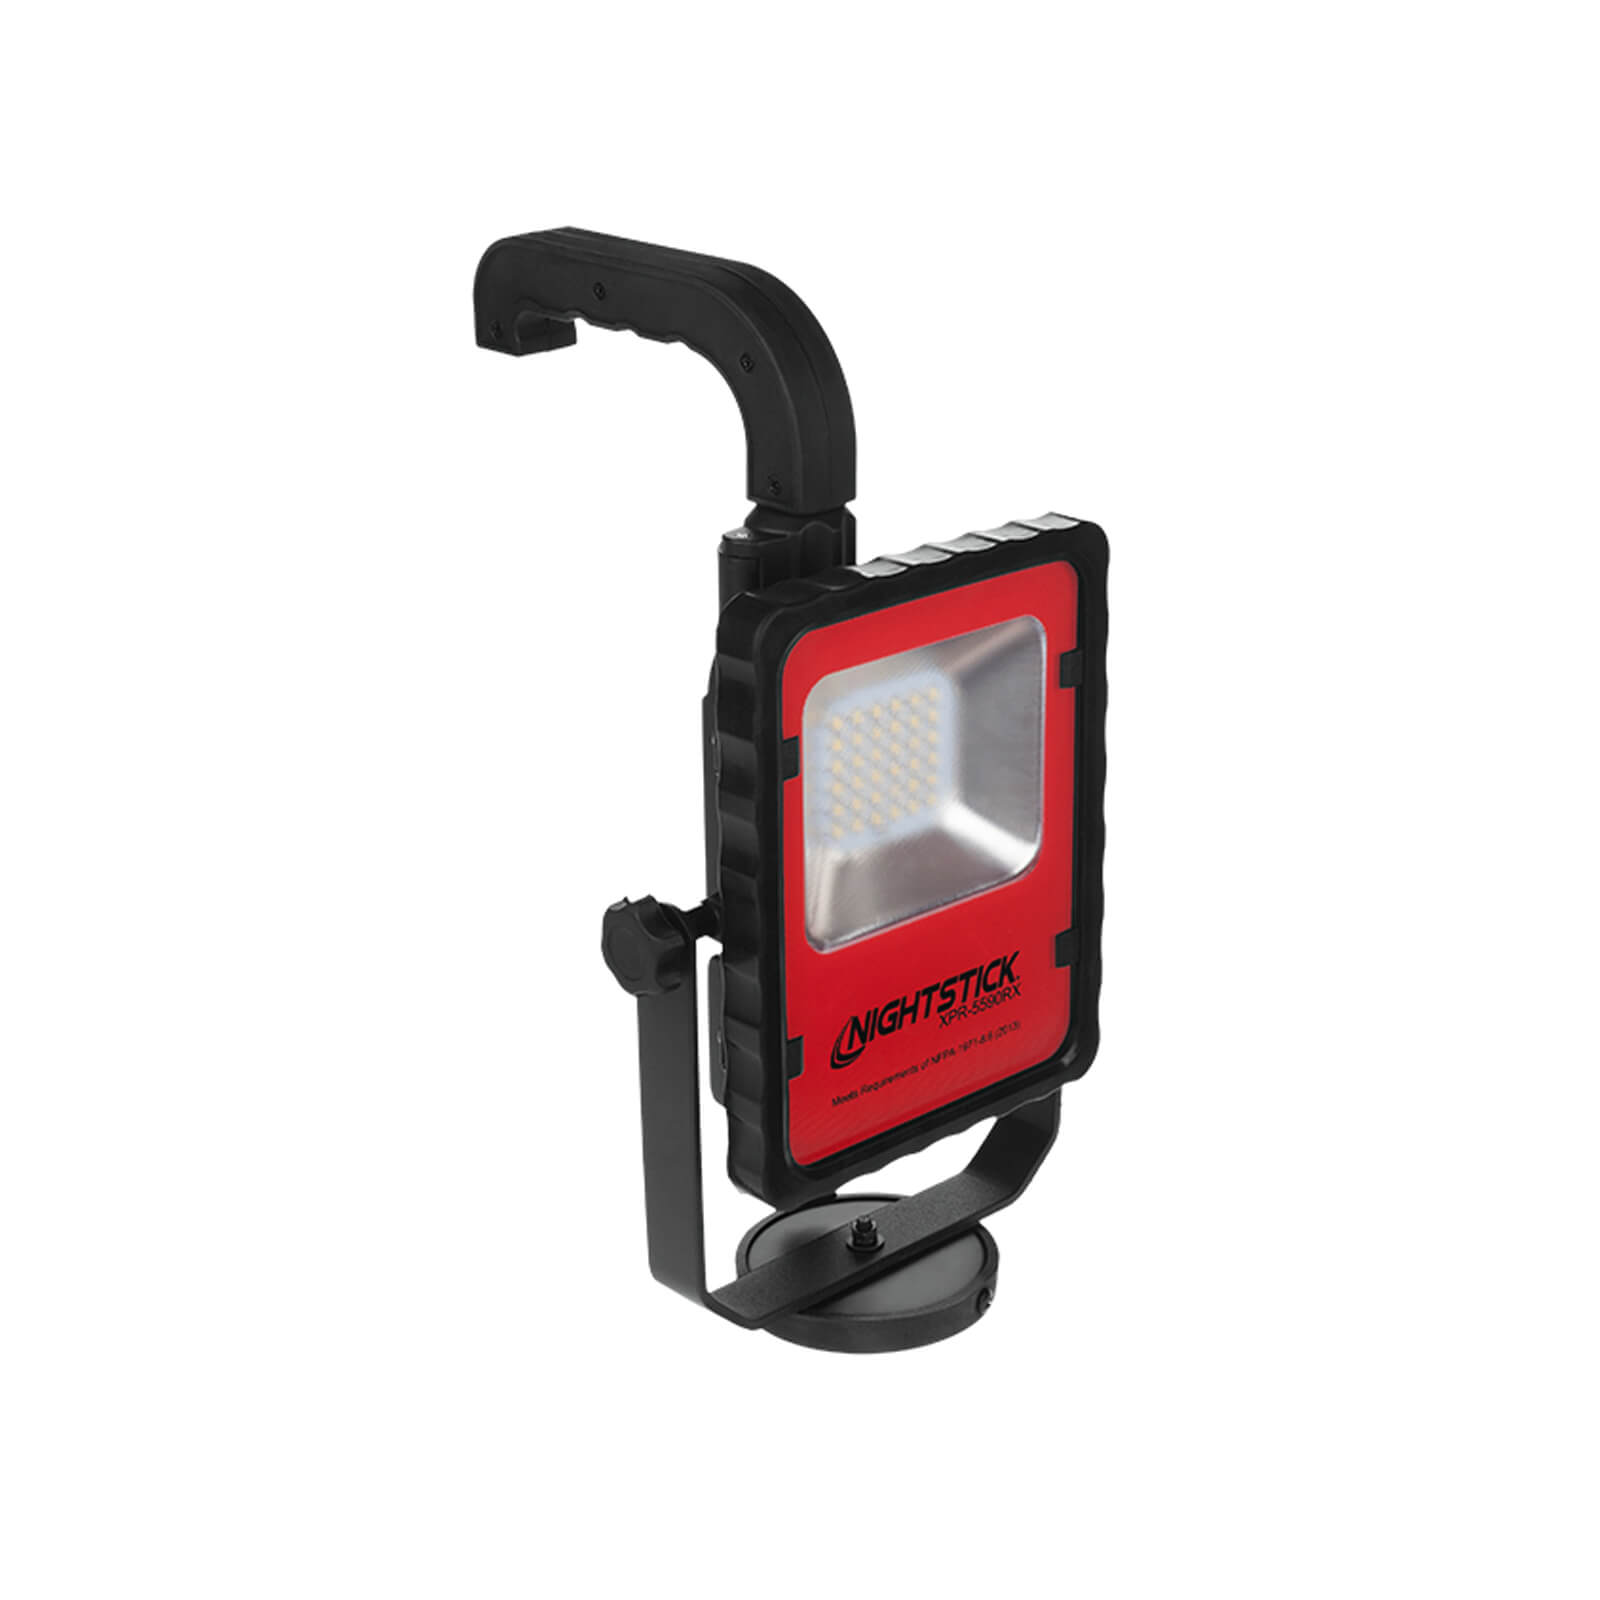 firefighter led light with tripod Nightstick XPR-5590RCX